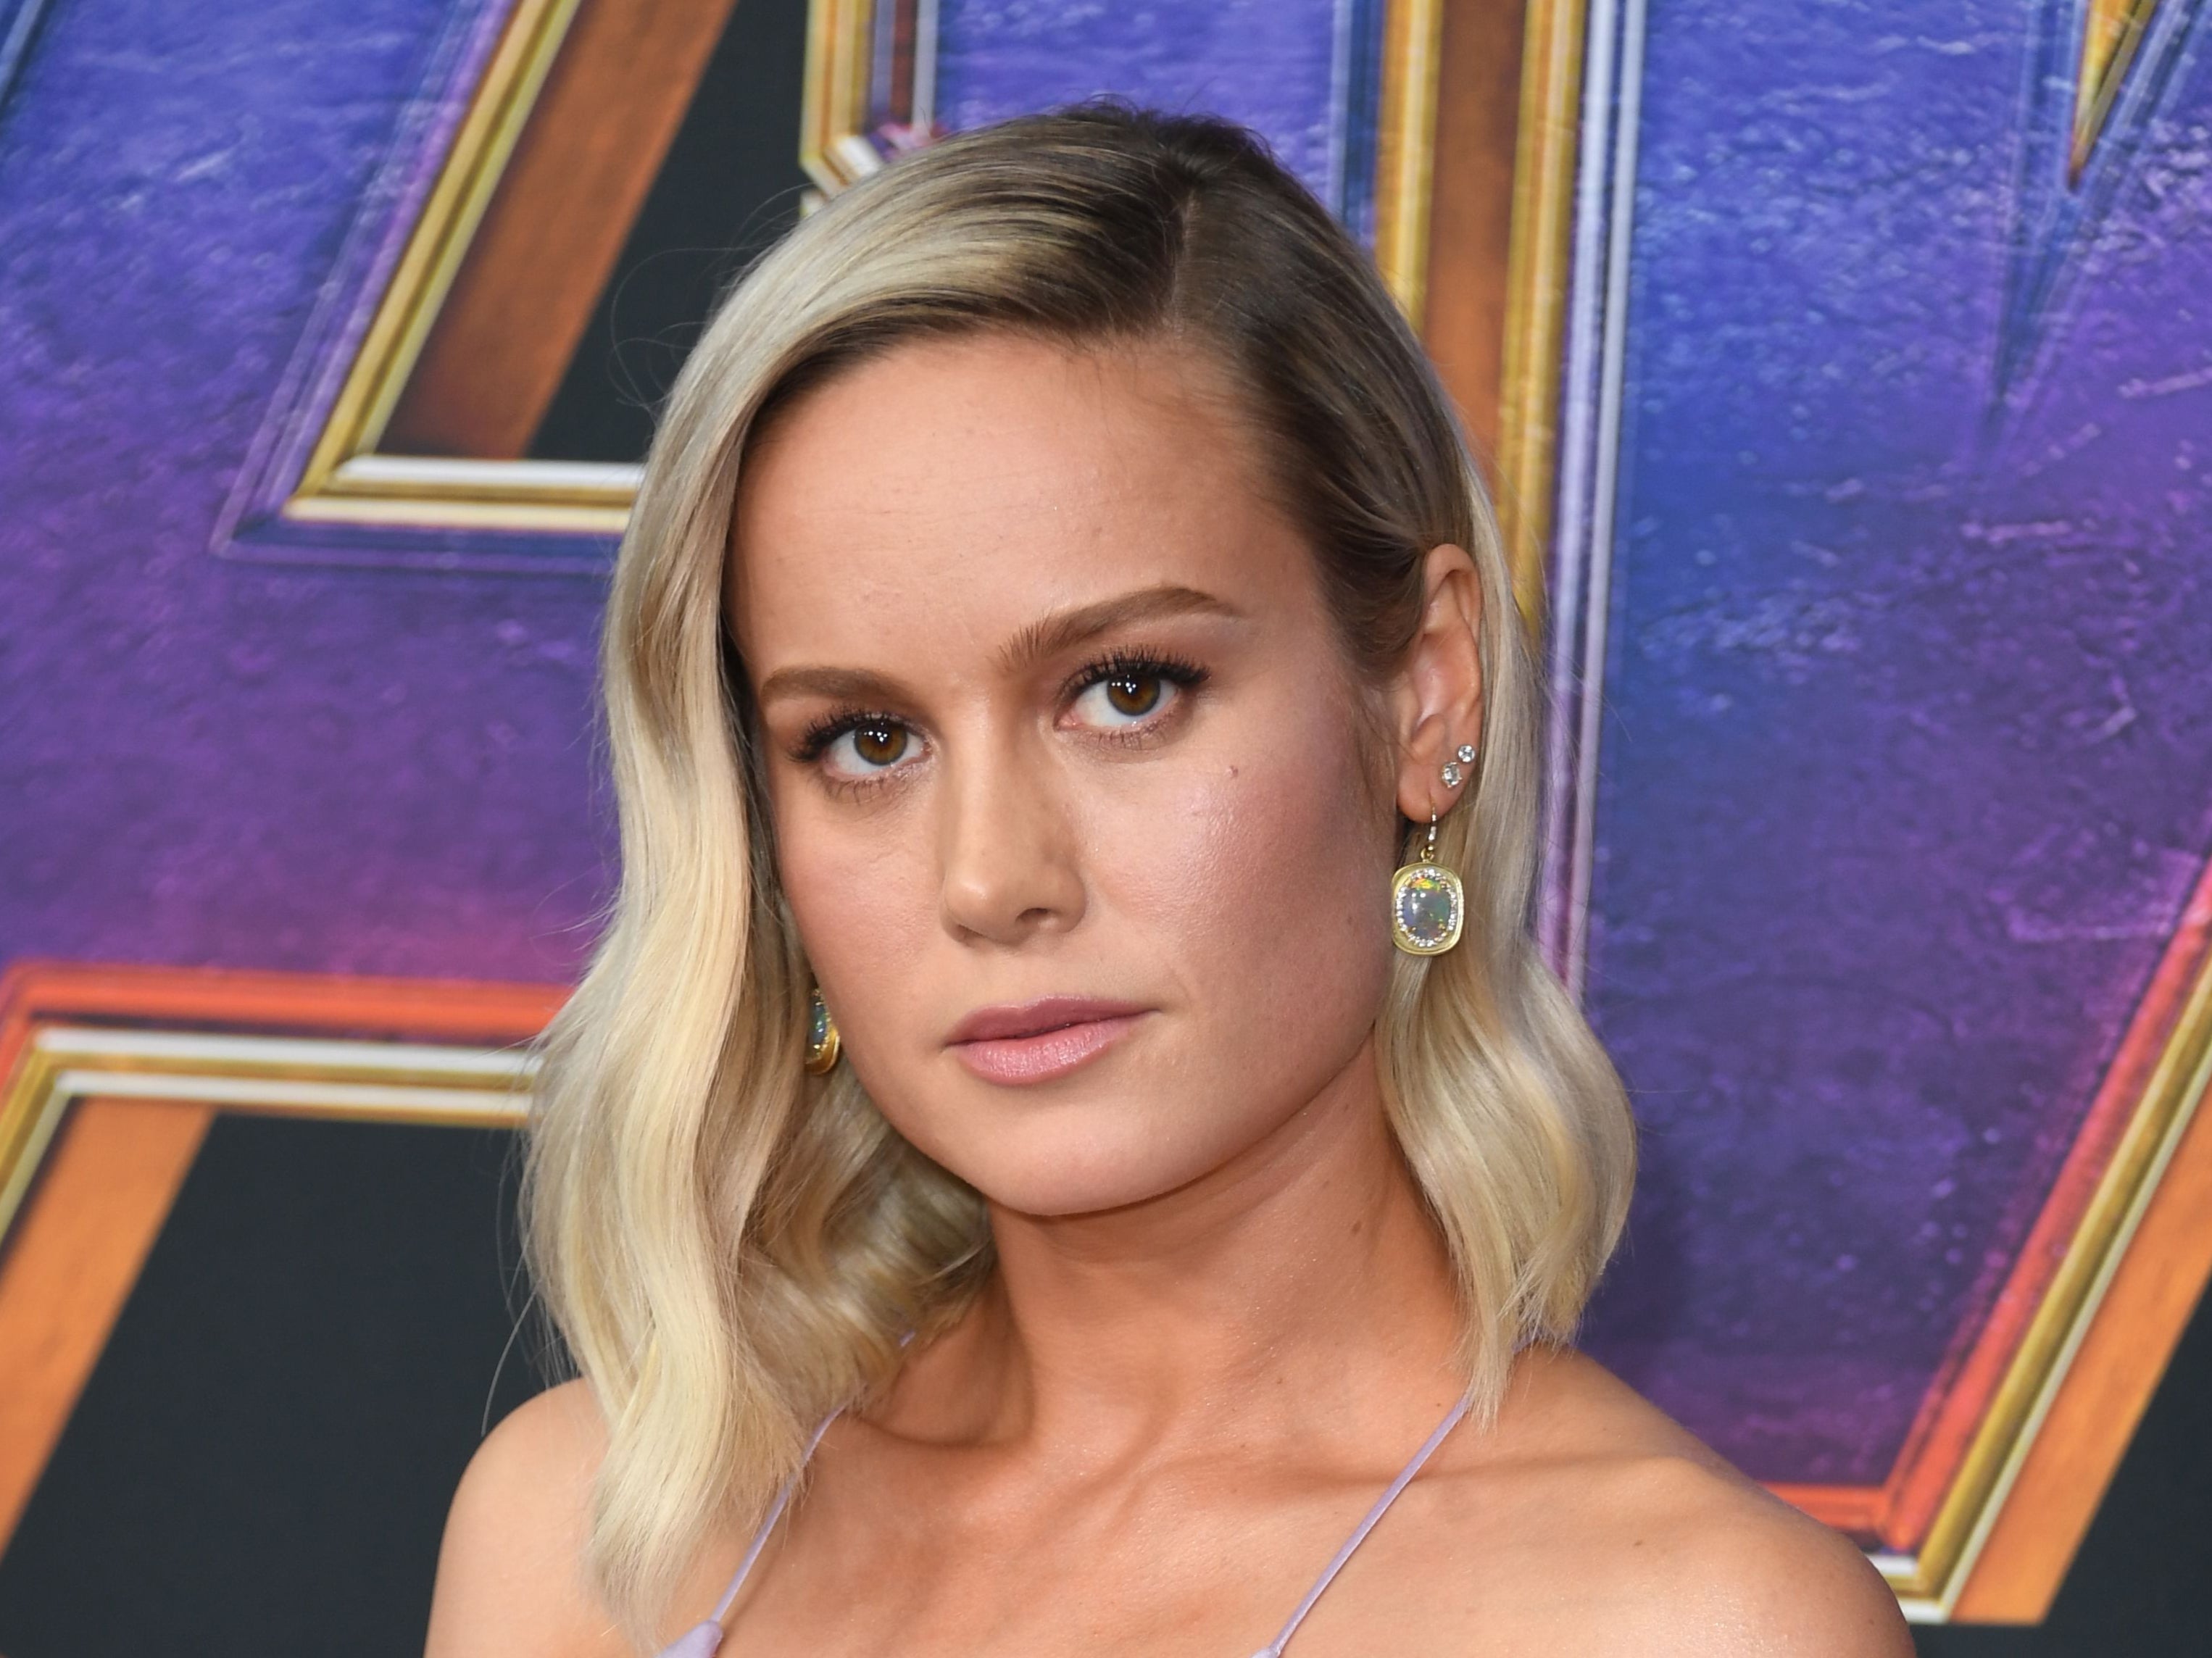 Captain Marvel 2: Brie Larson has every right to be livid at MCU trolls |  The Independent